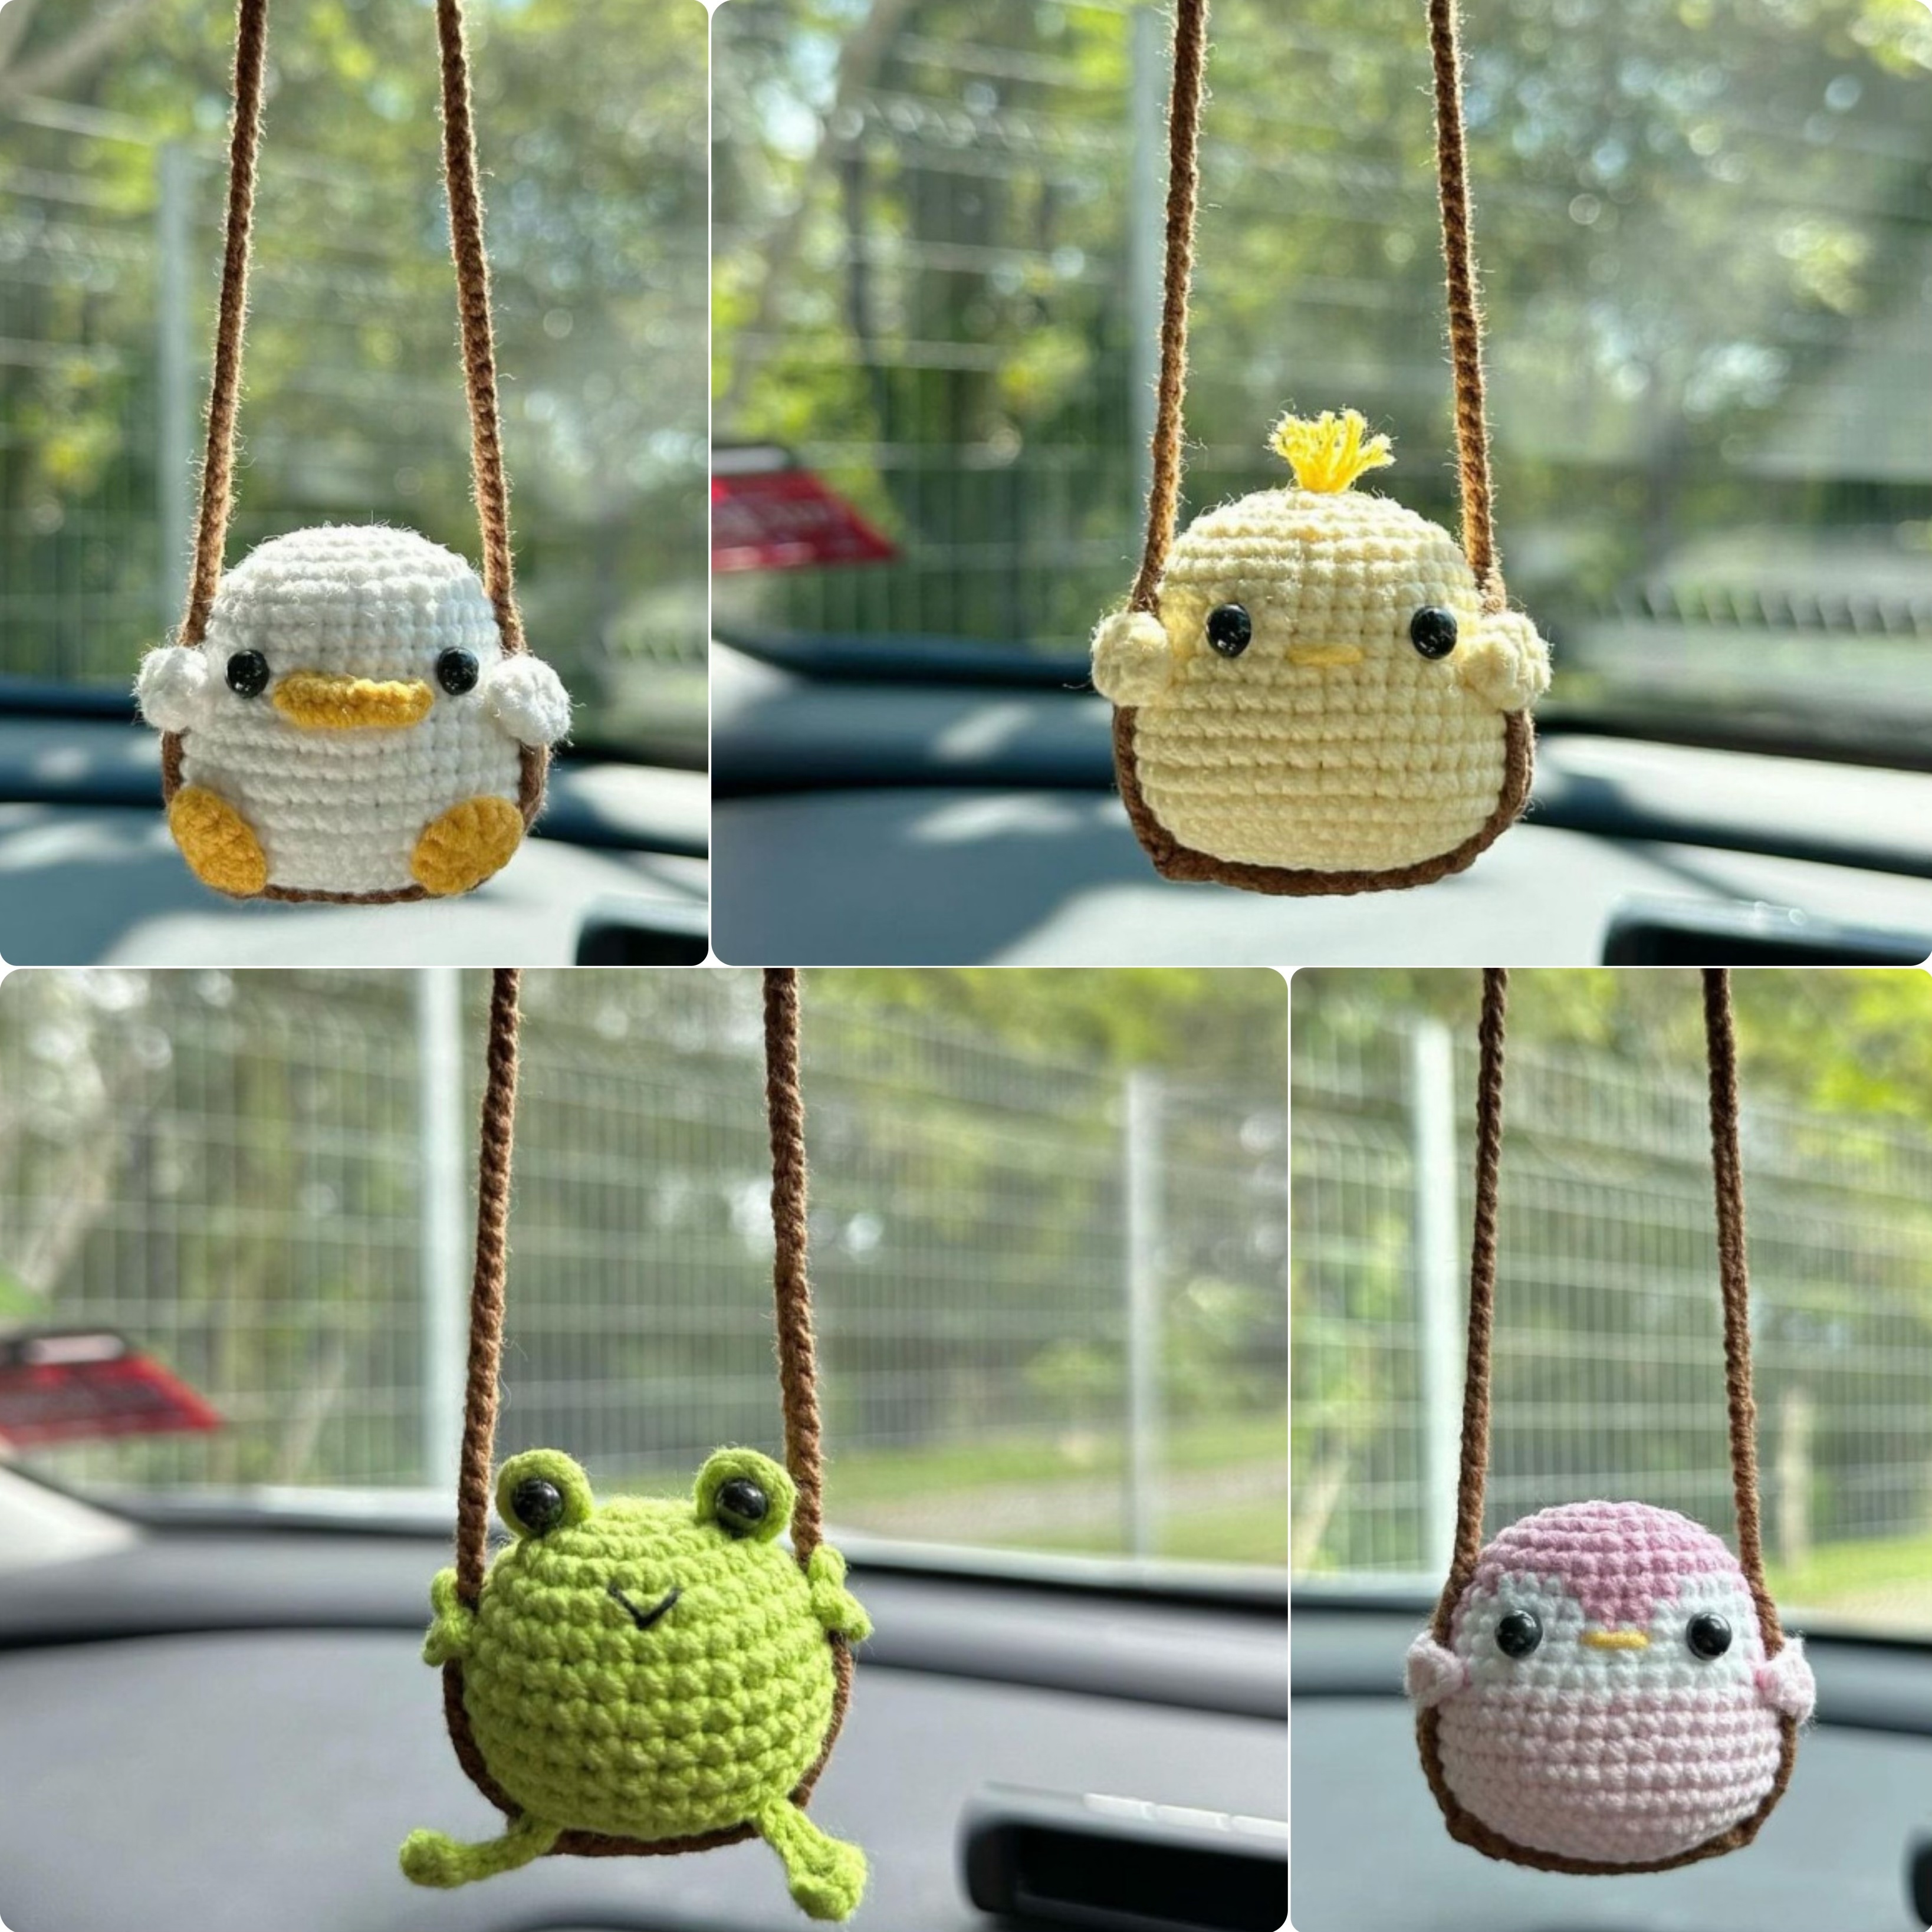 

New Handmade Crochet Cute Three-dimensional Swing Small Animal Car Accessories Women Charm Bag Decoration Pendant Rearview Mirror Charm Decoration Indoor Decor Holiday Gift